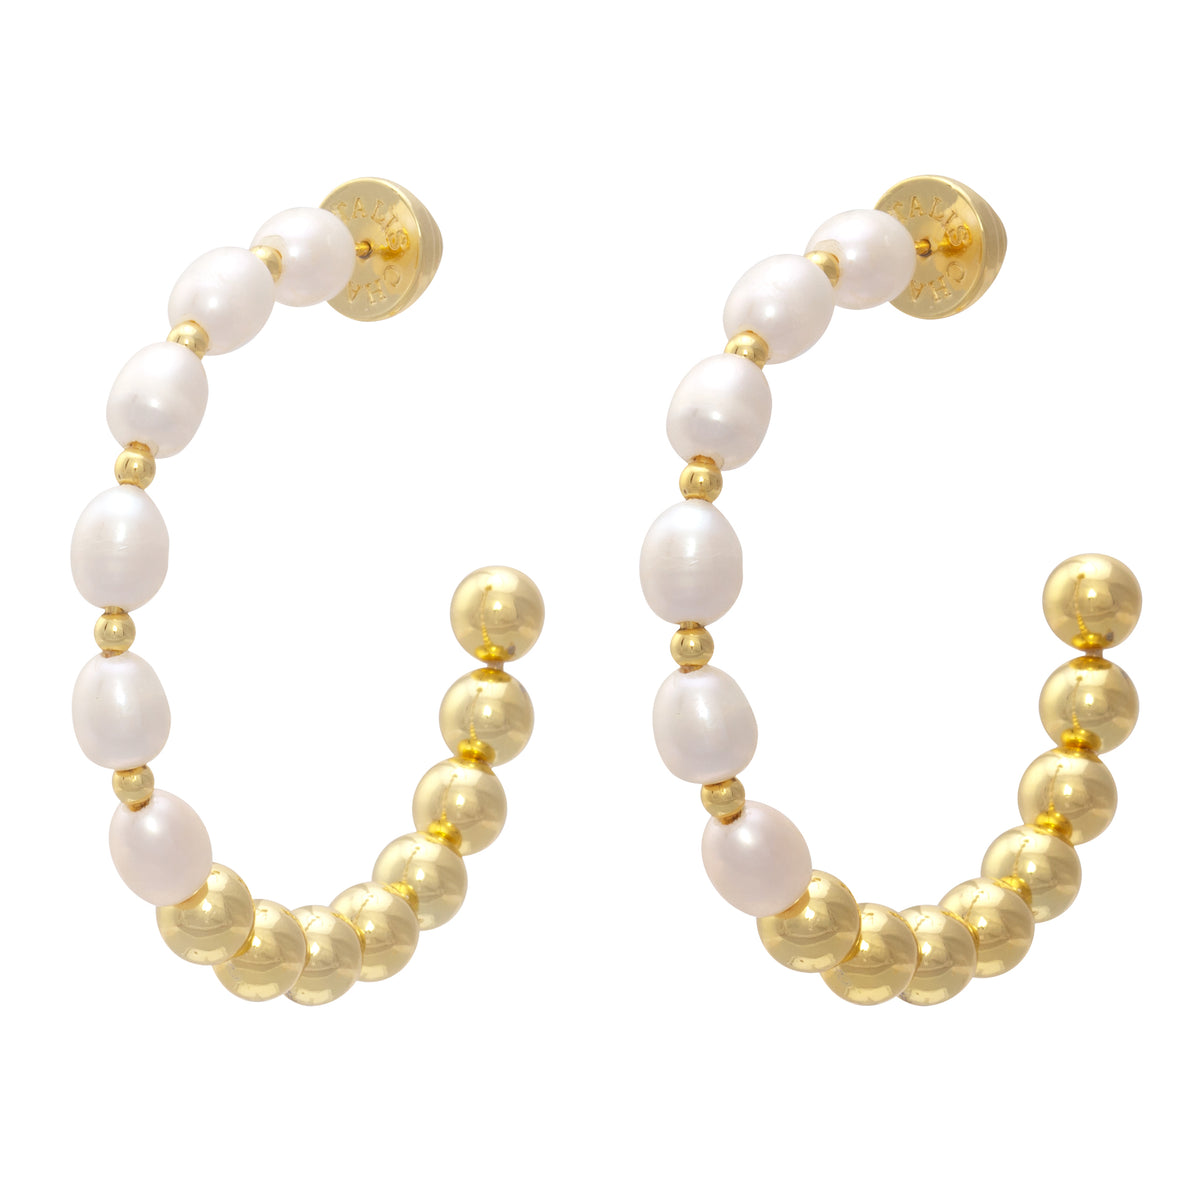 Large hoop earrings with six freshwater pearls and gold plated spheres